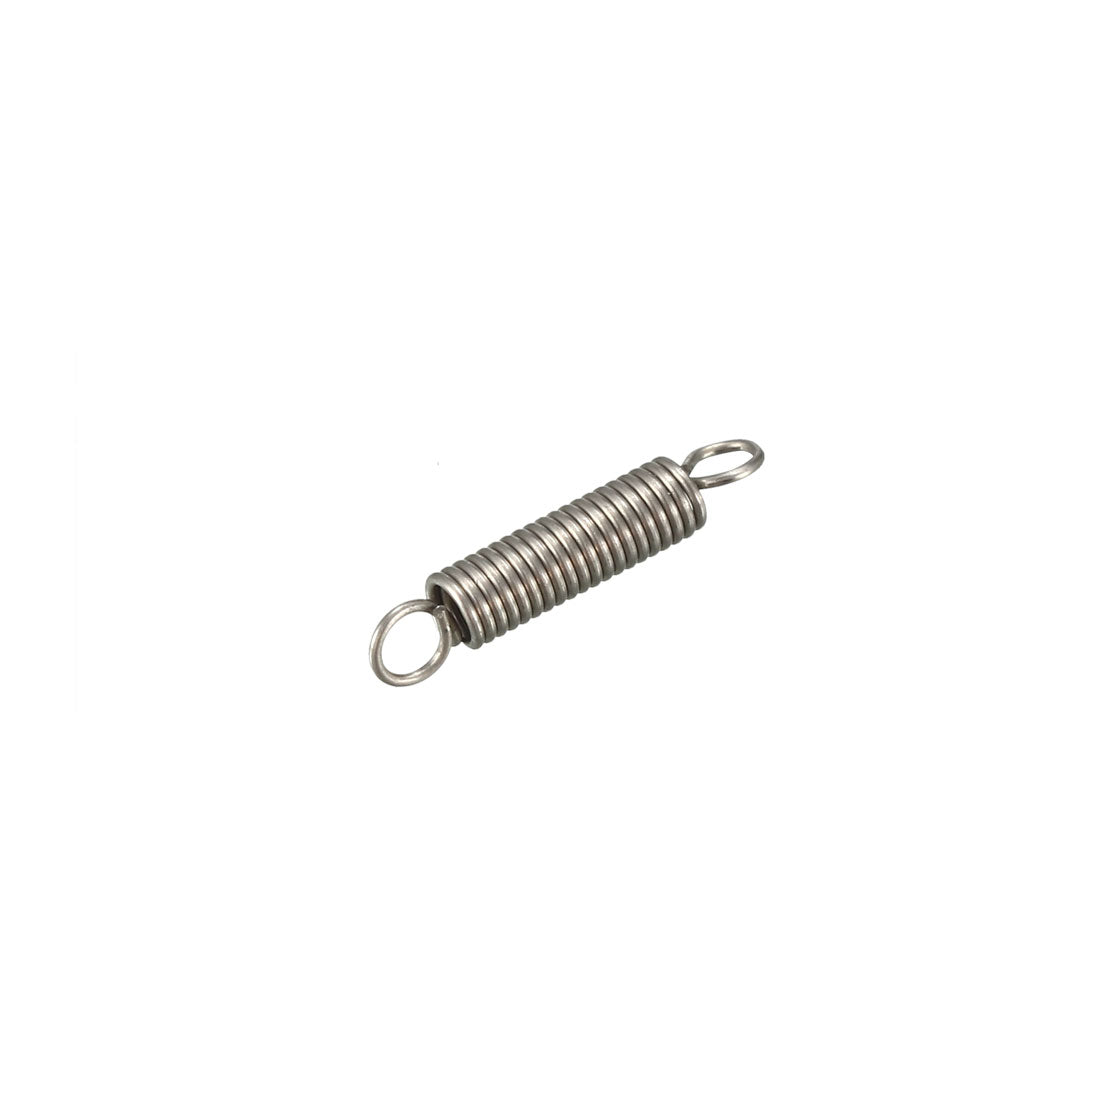 uxcell Uxcell Extended Tension Spring Wire Diameter 0.012", OD 0.08", Free Length 0.39" 100pcs